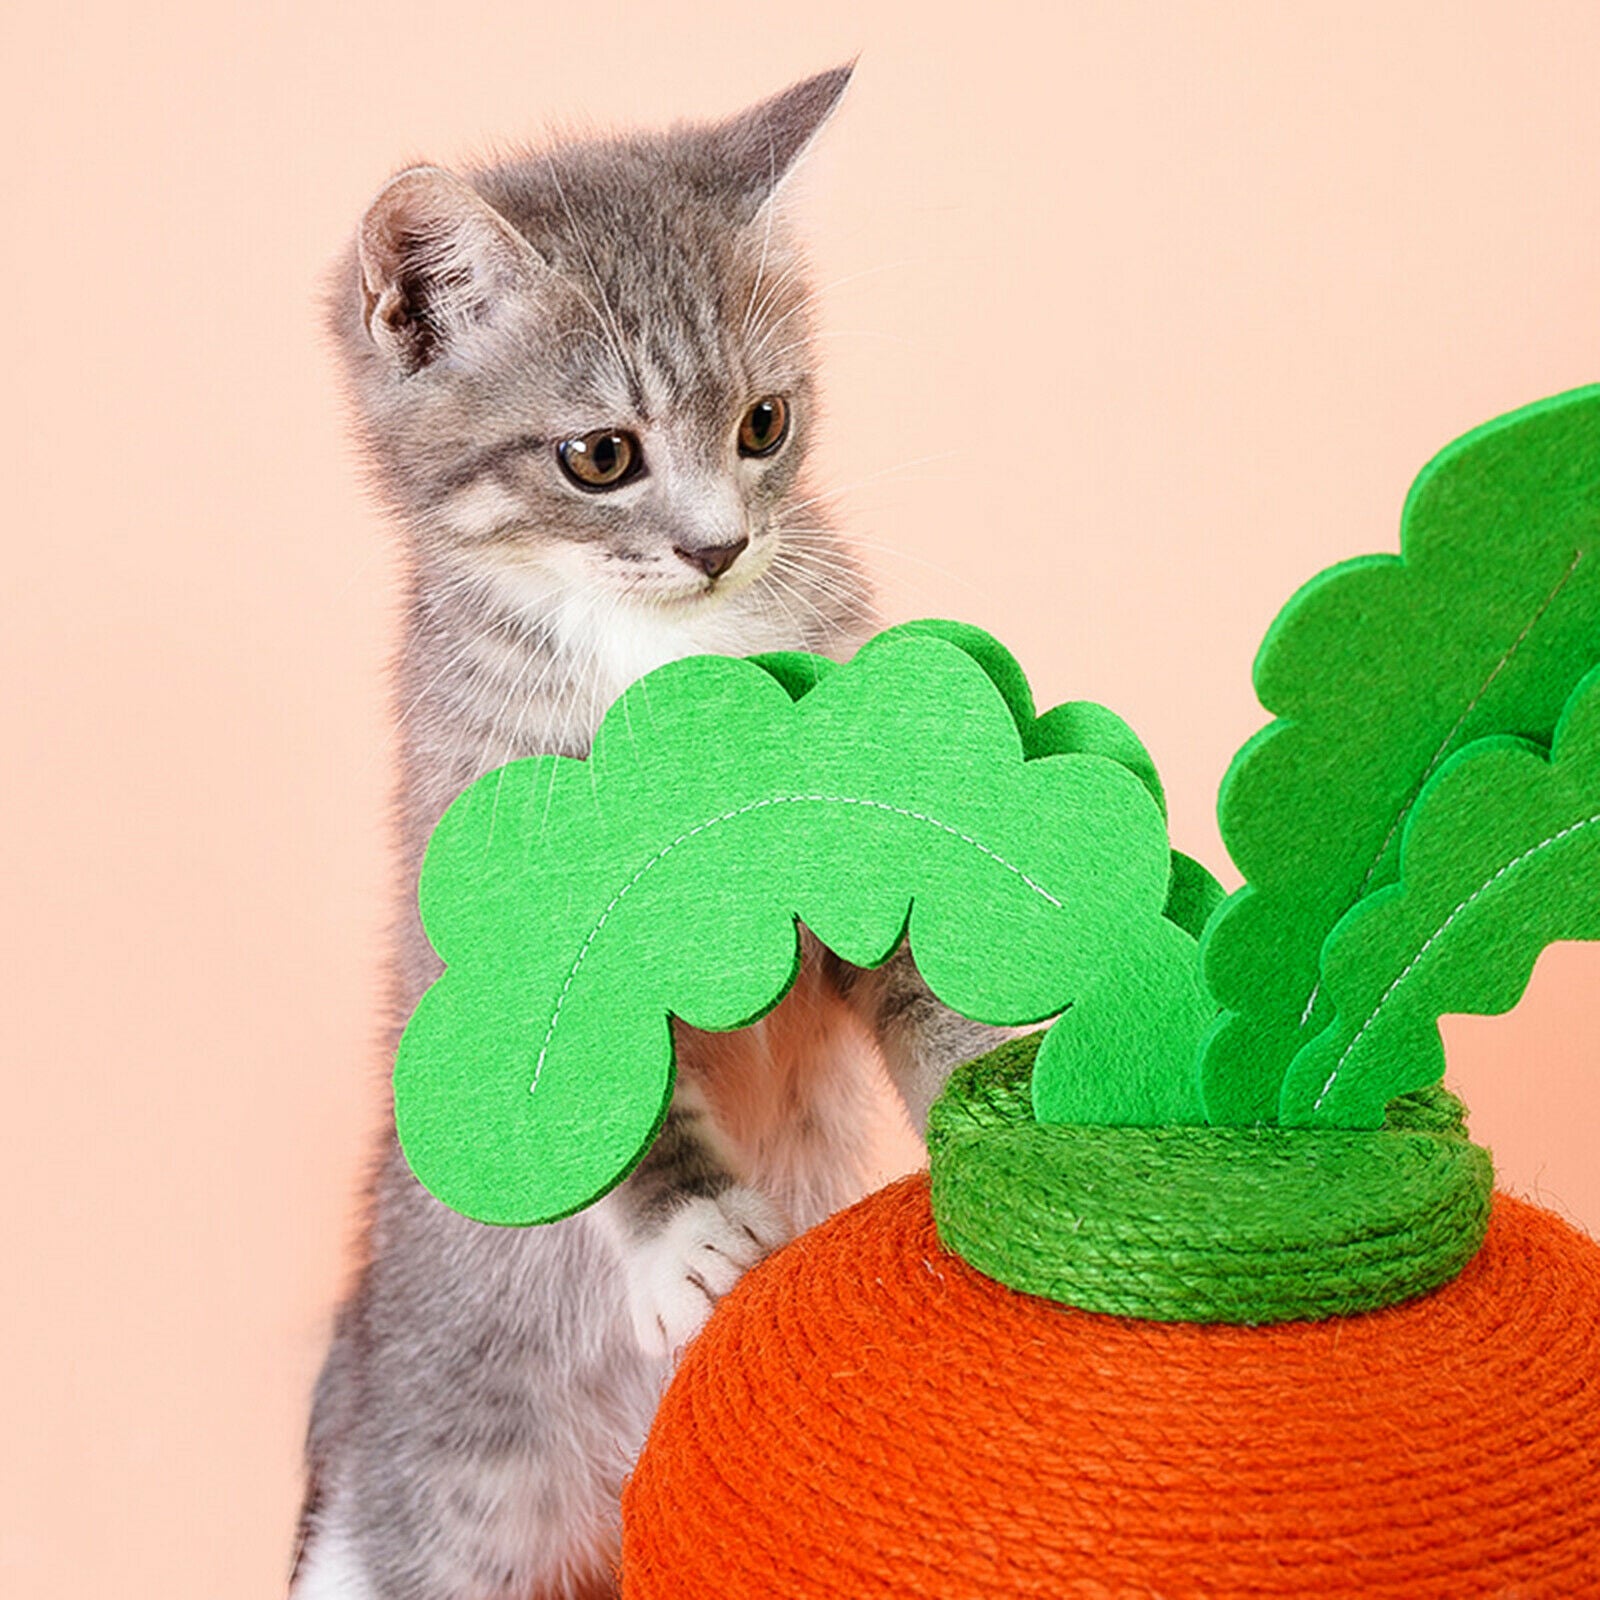 Cat Scratchers Cat Climbing Tower with Big Carrots for Climbing Indoor Cats